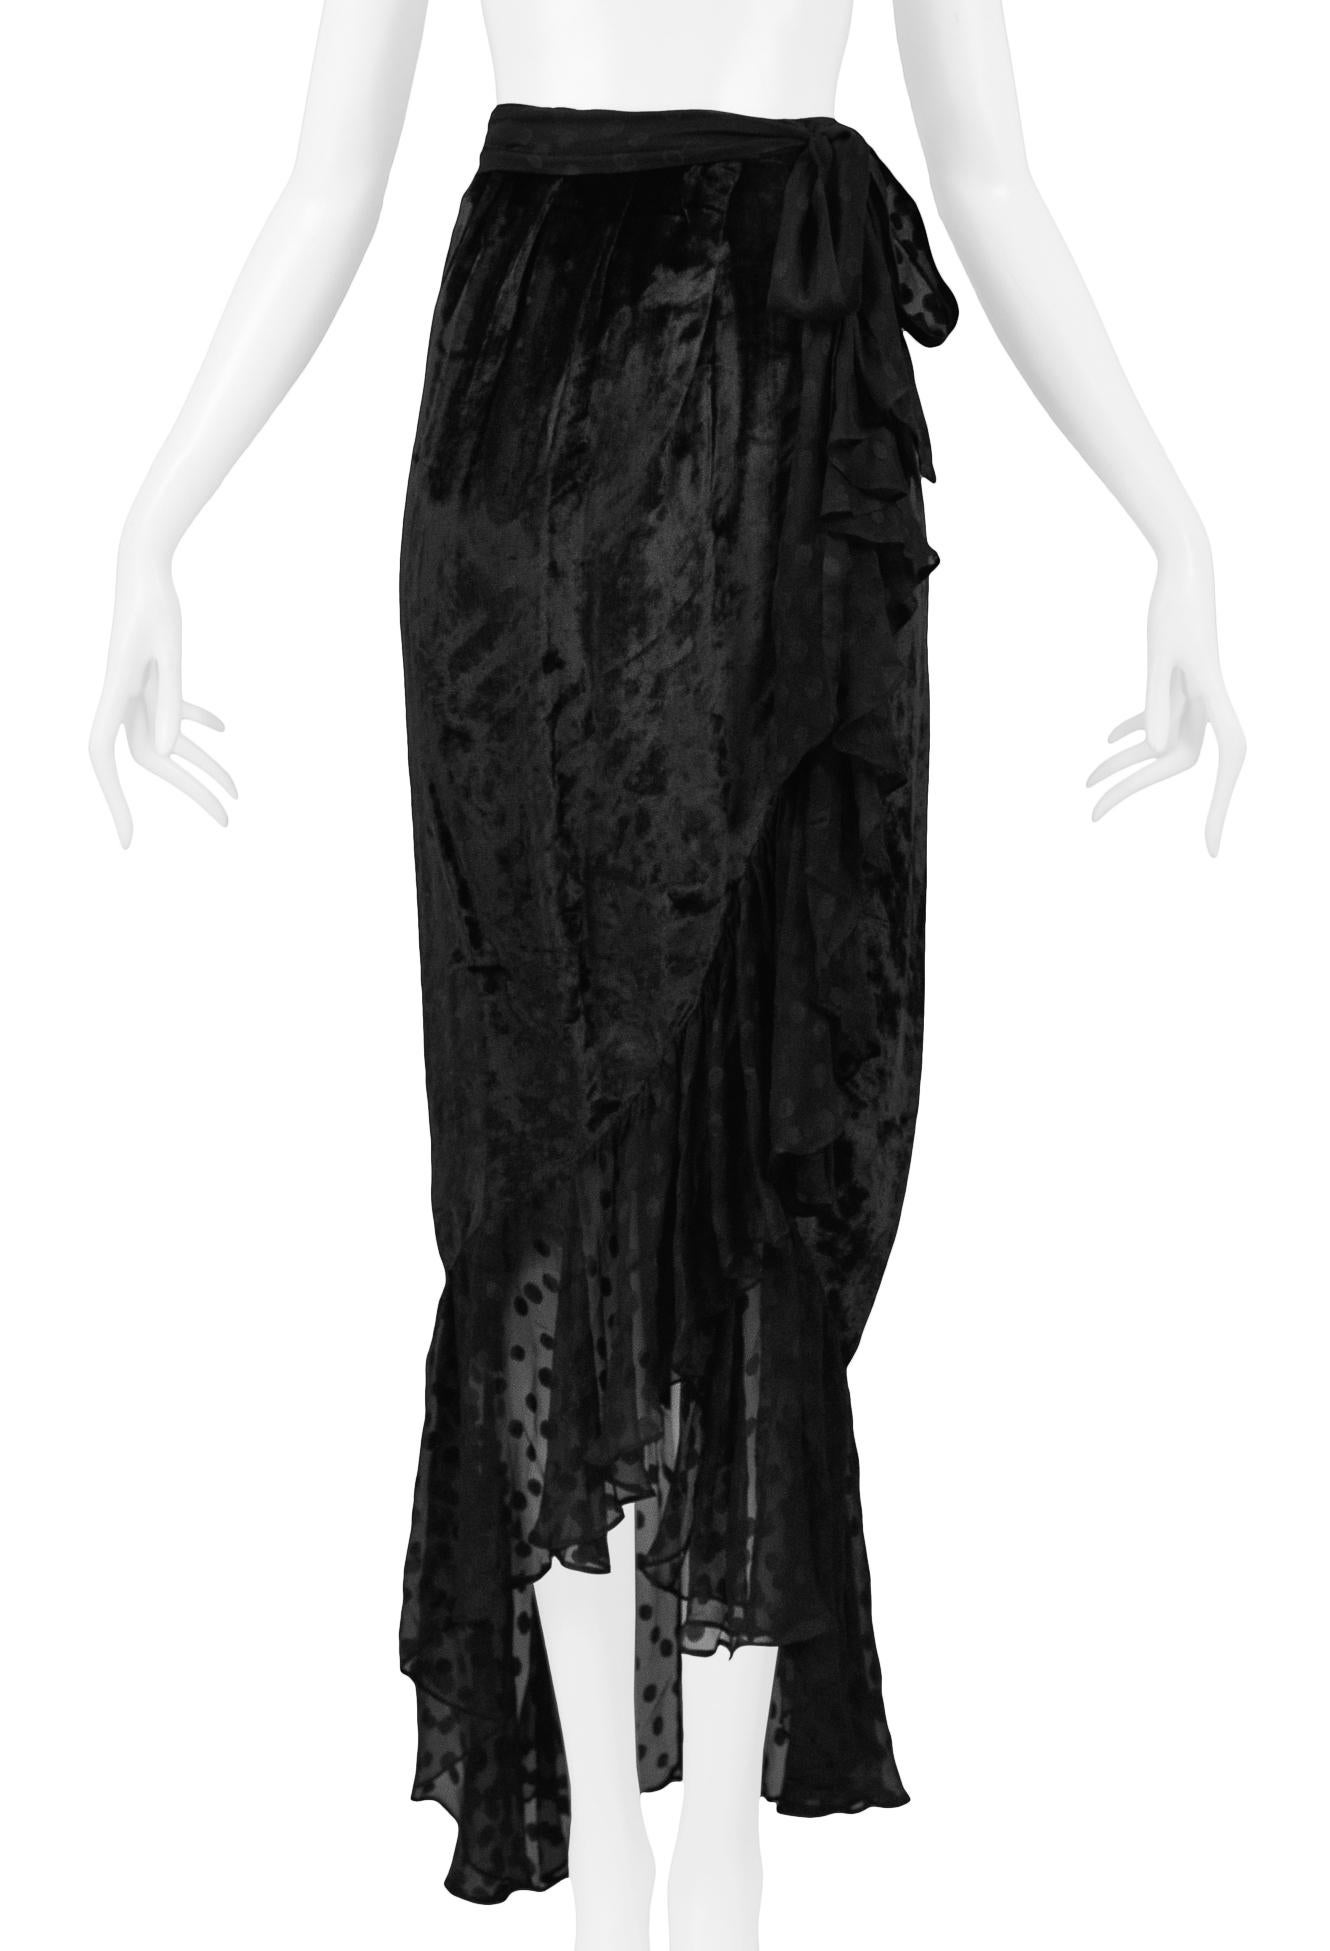 Resurrection Vintage is excited to offer a vintage Yves Saint Laurent black silk chiffon and velvet ruffle evening skirt featuring a high waist, wrap front with exposed slit, dot print chiffon ruffles, hook and eye closure, and tie belt. 

Yves